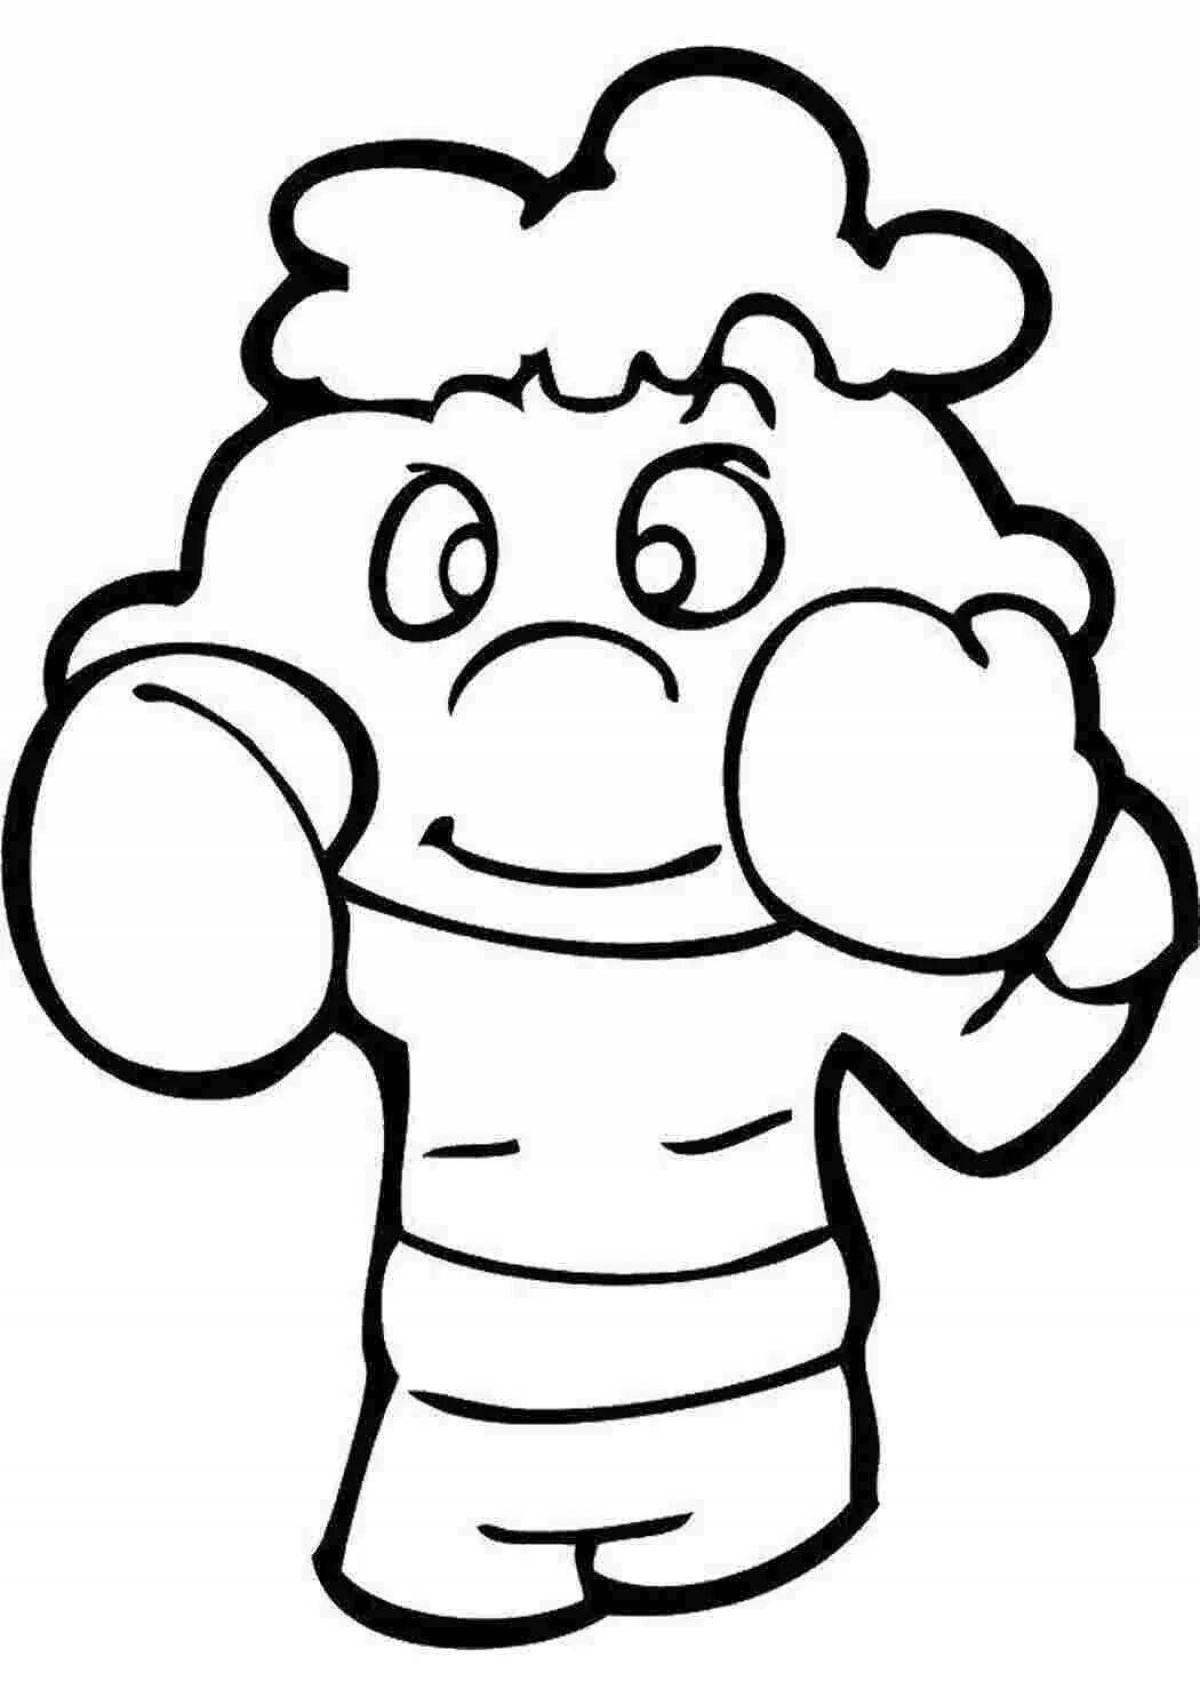 Outstanding boxing and boo coloring page for kids